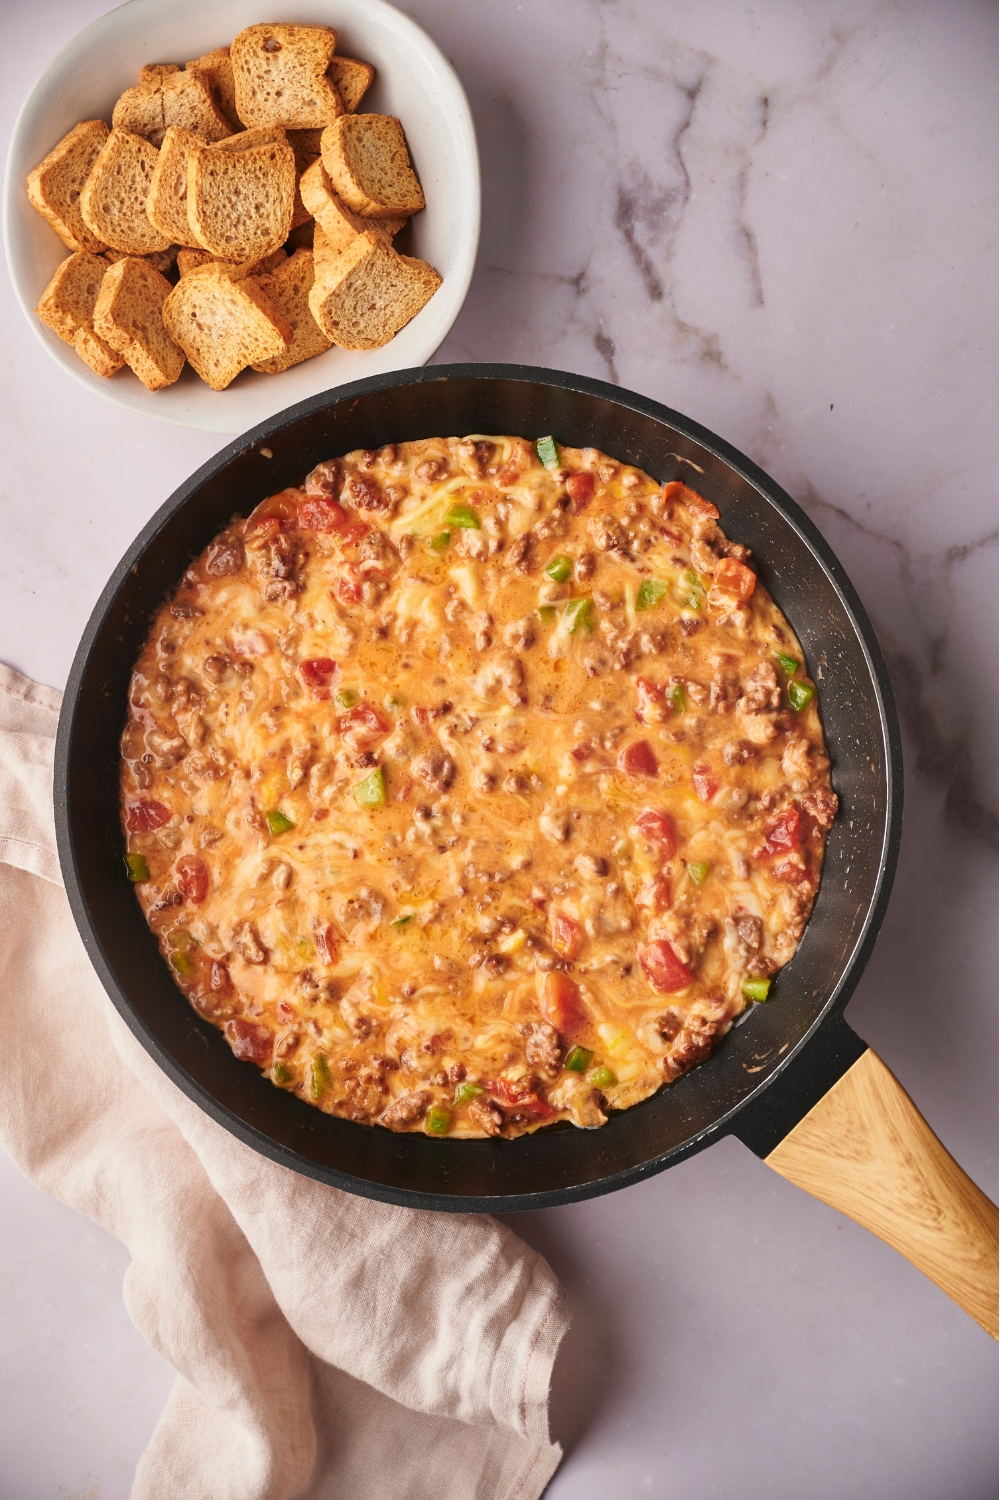 Rotel dip cooking in a skillet.